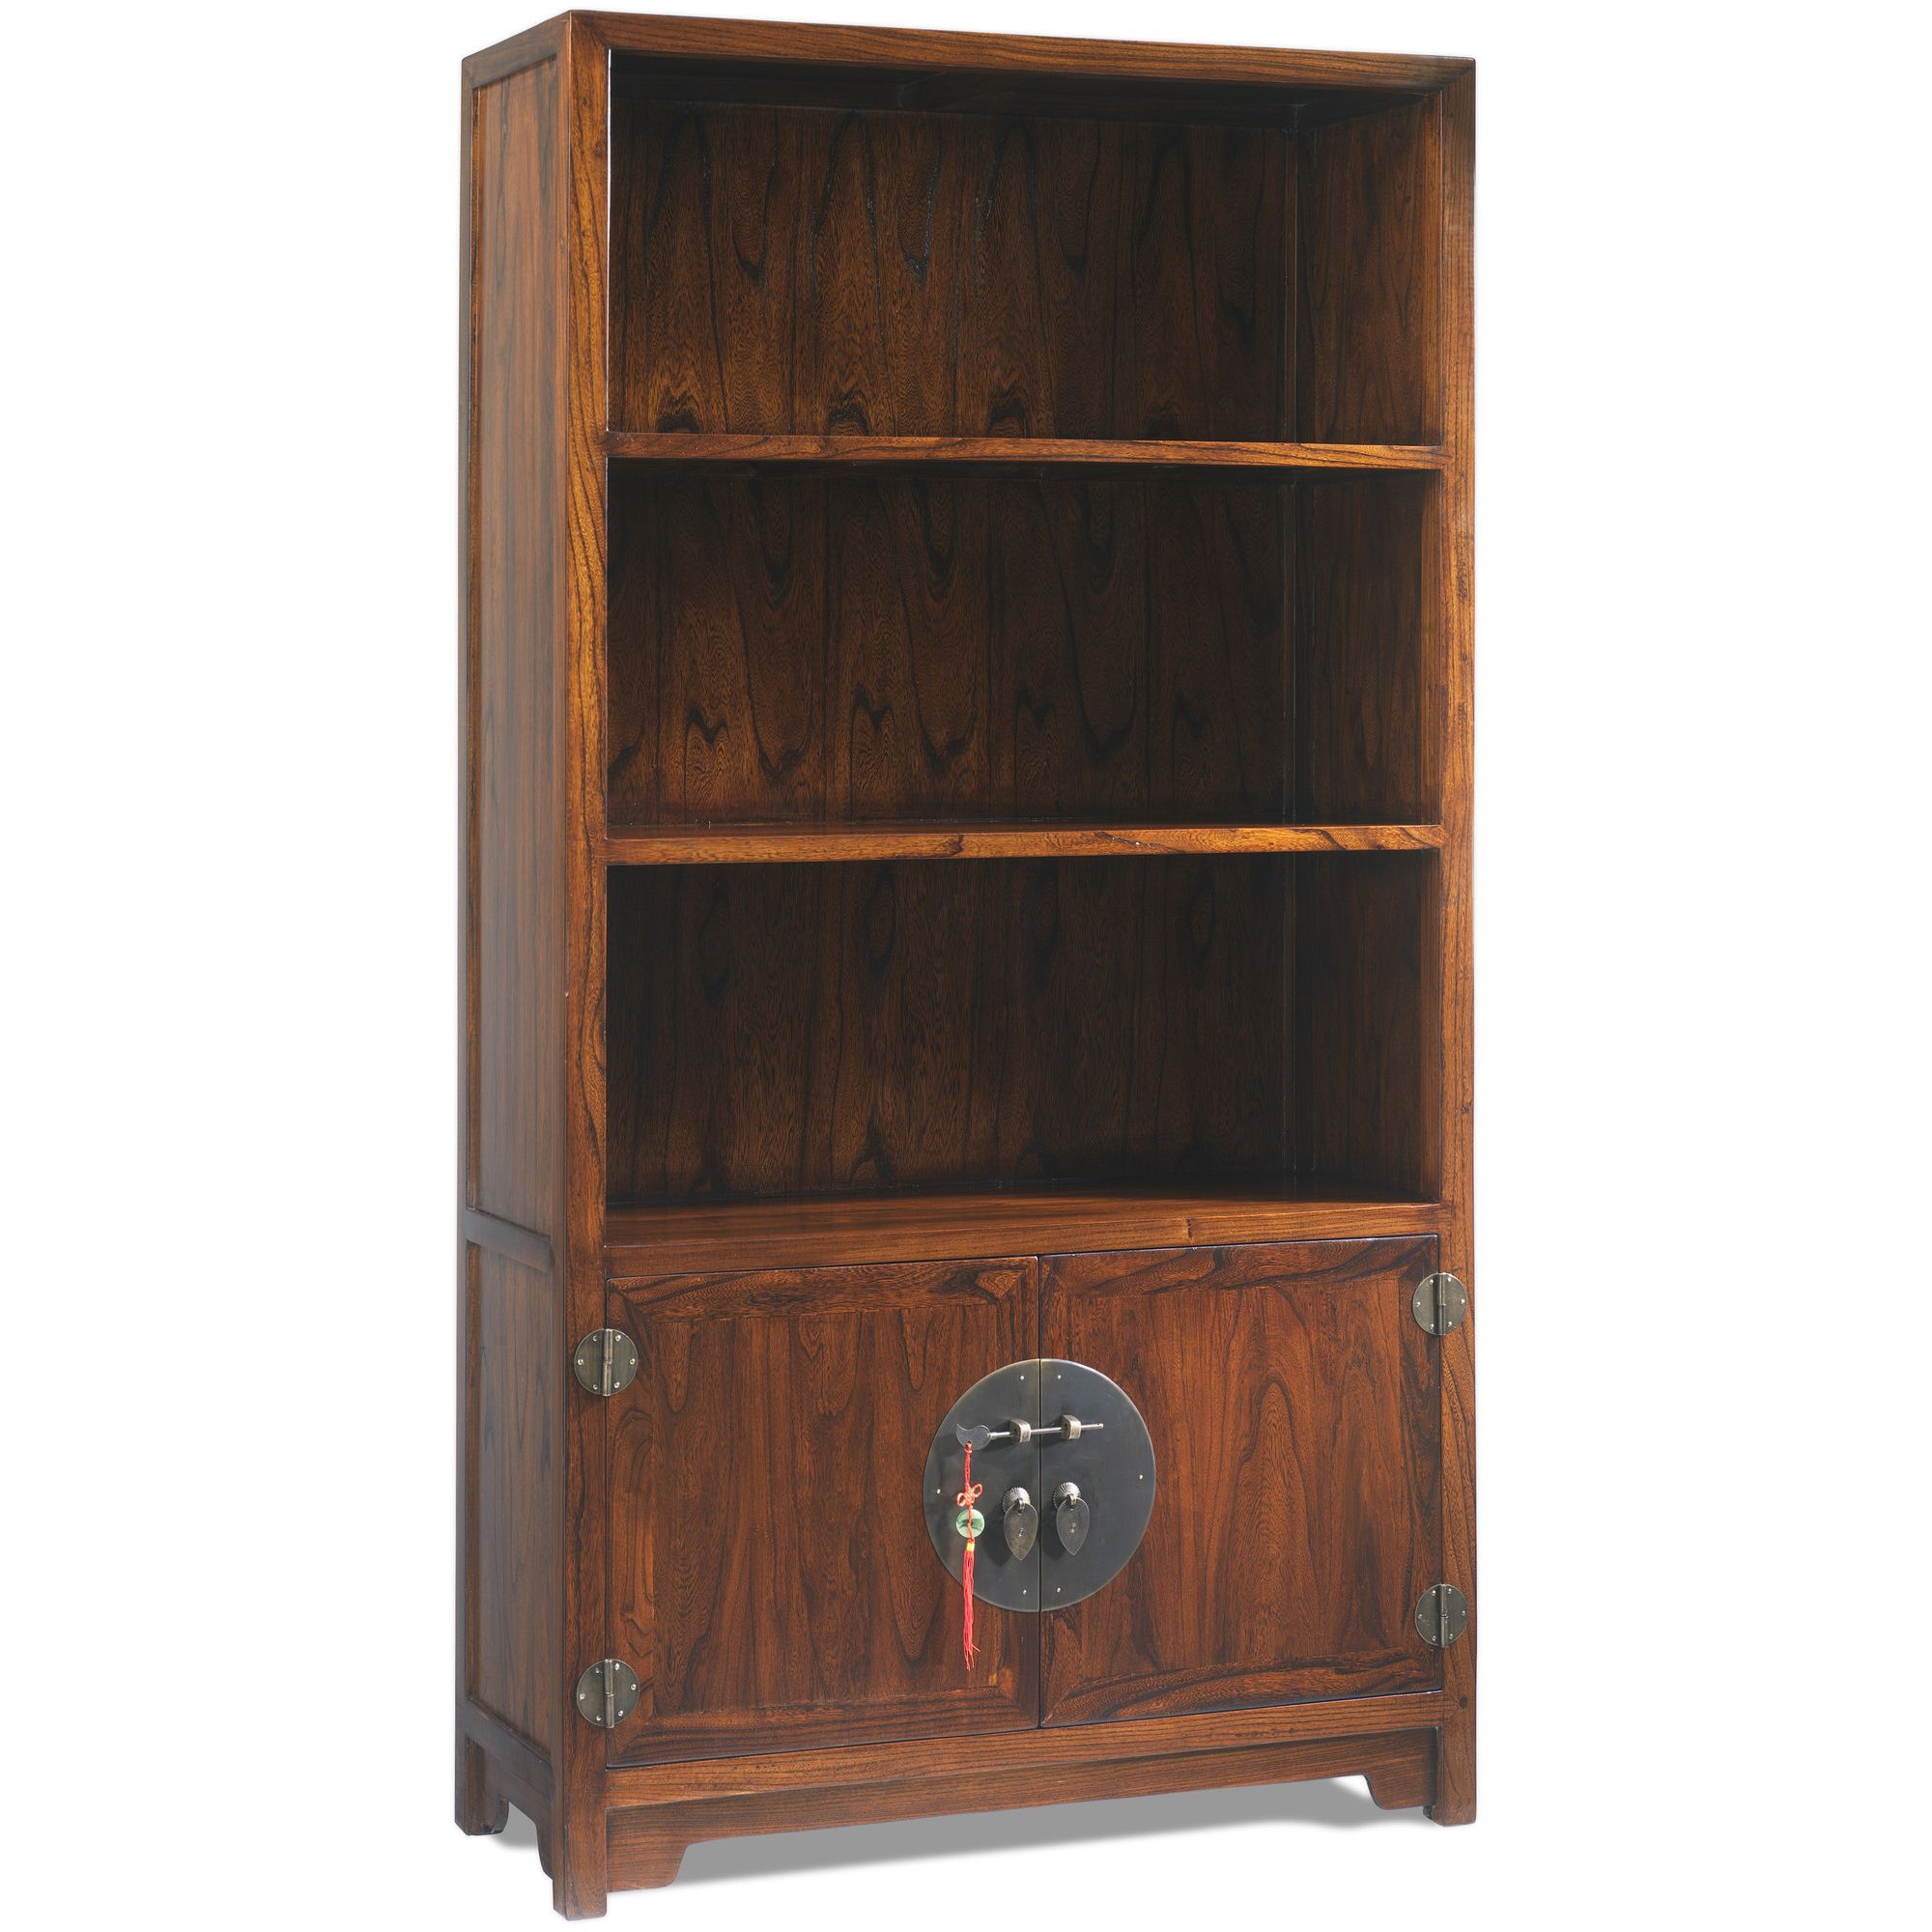 Shimu Chinese Classical Book Cabinet - Warm Elm at Tesco Direct